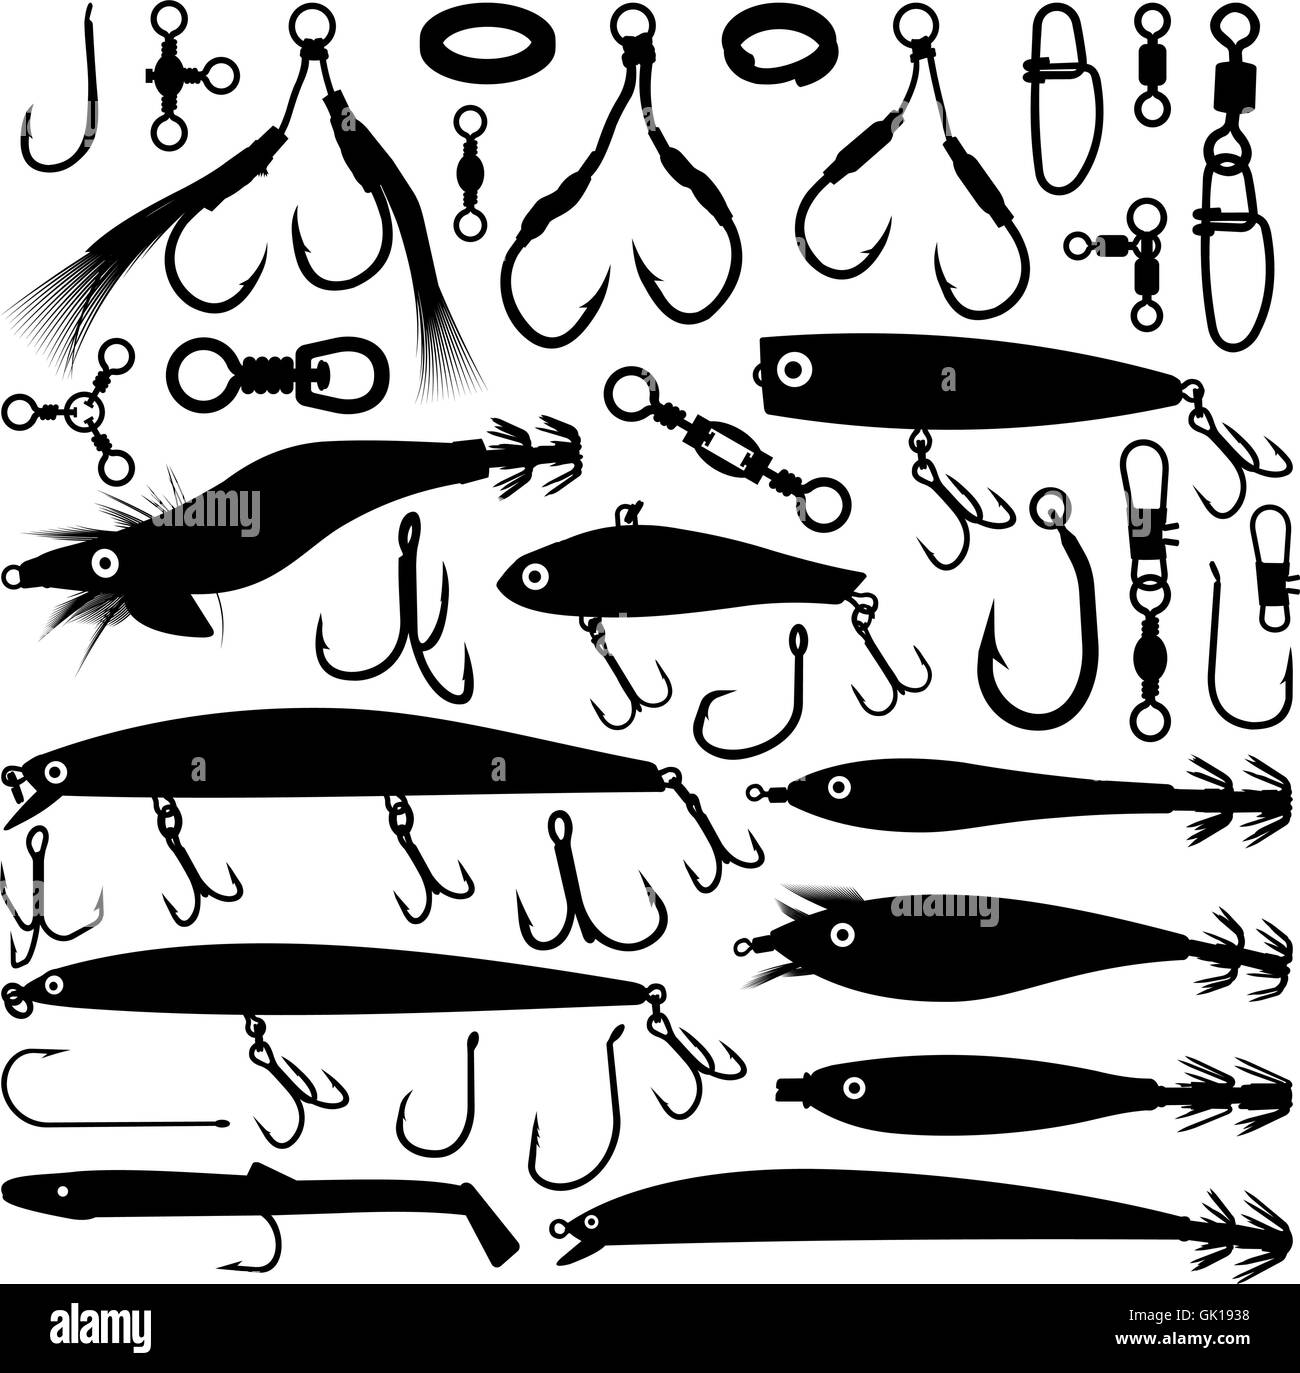 Fishing lure vector Black and White Stock Photos & Images - Alamy